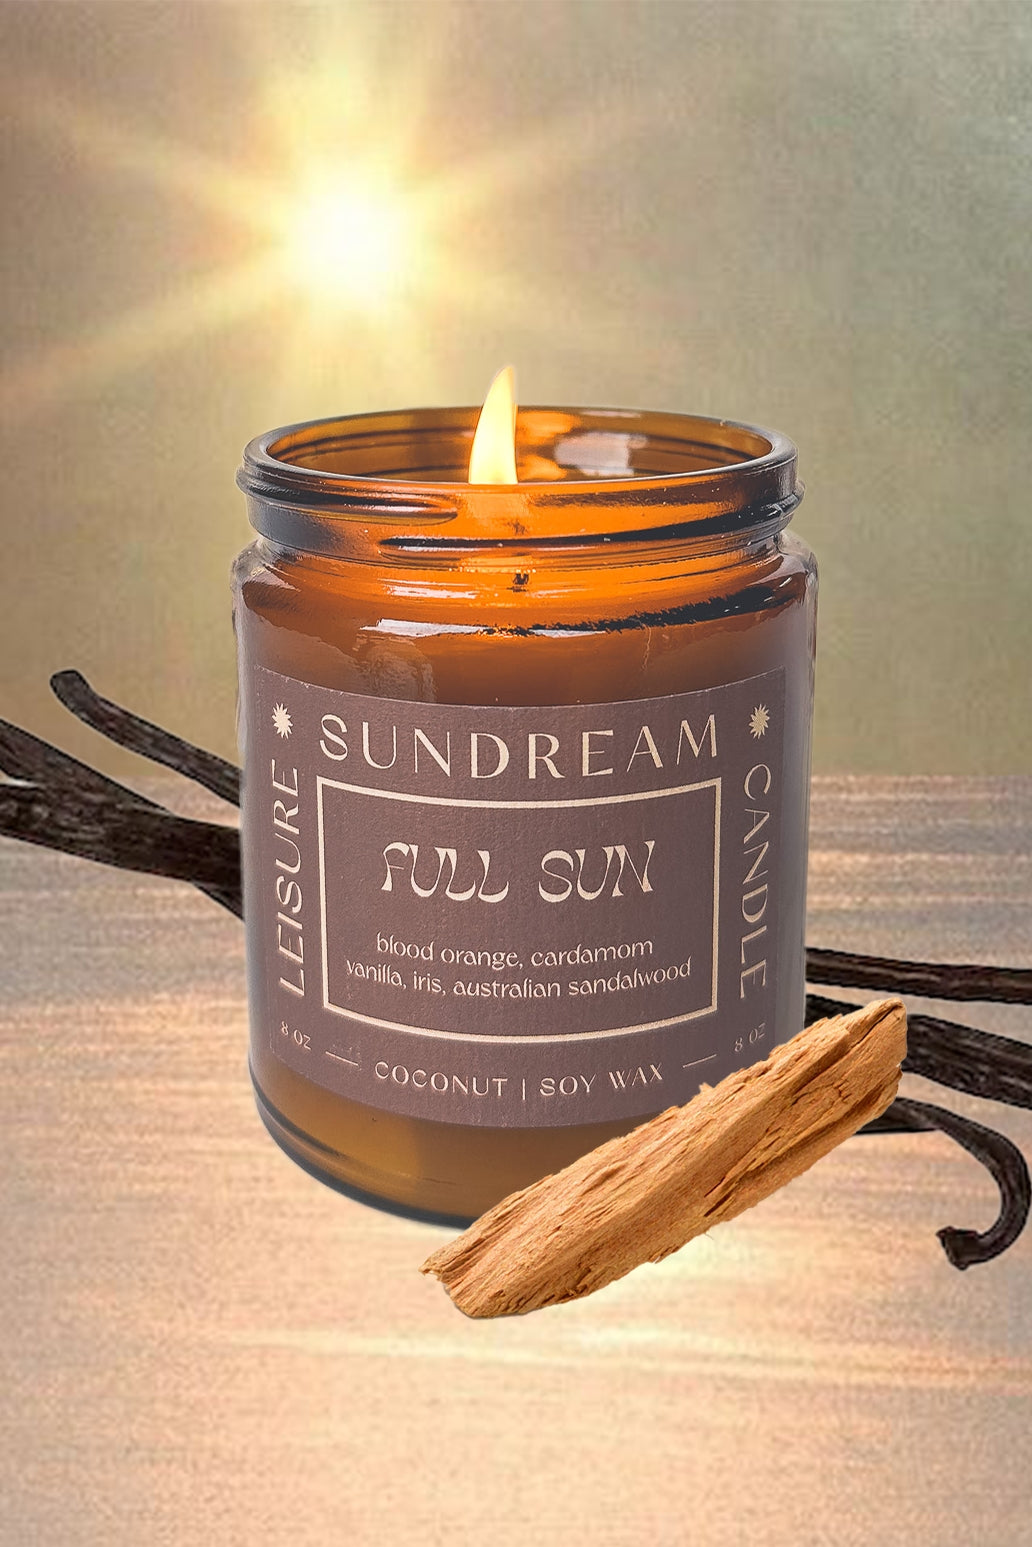 Sundream full sun candle hand poured in southern California with cardamom and vanilla notes